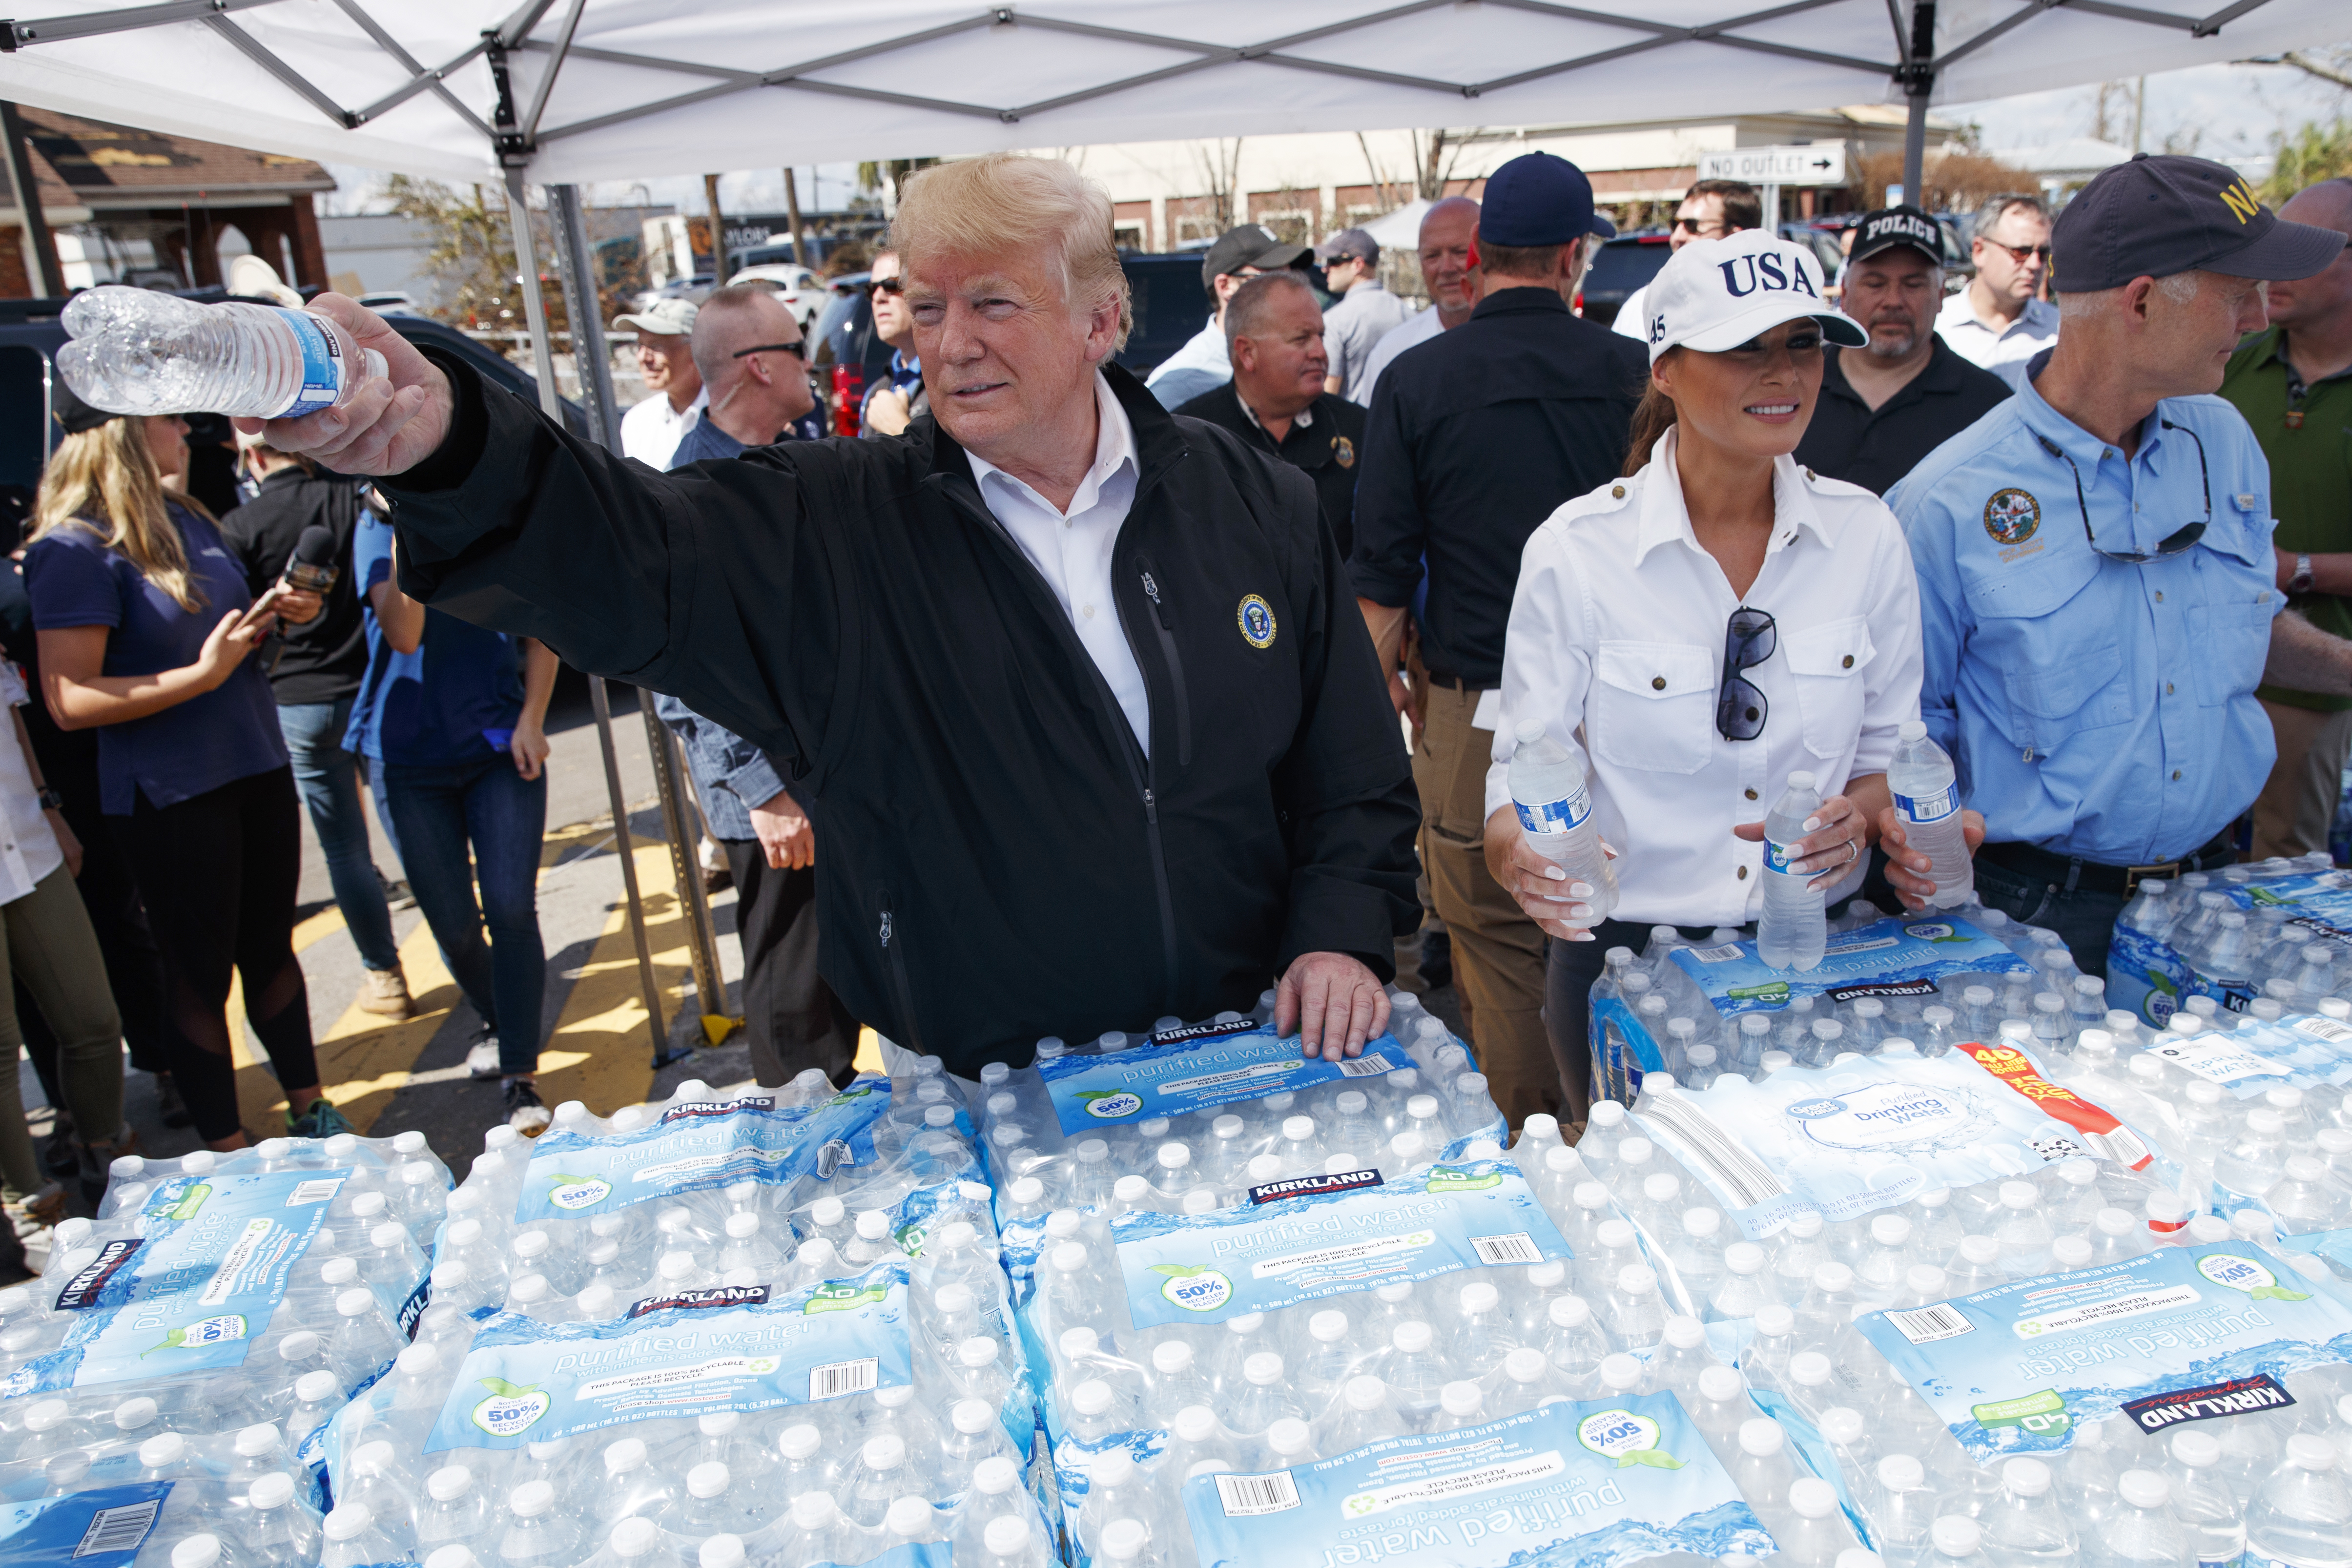 Donald and Melania Trump hand out water during a visit to areas affected by Hurricane Michael in Florida 